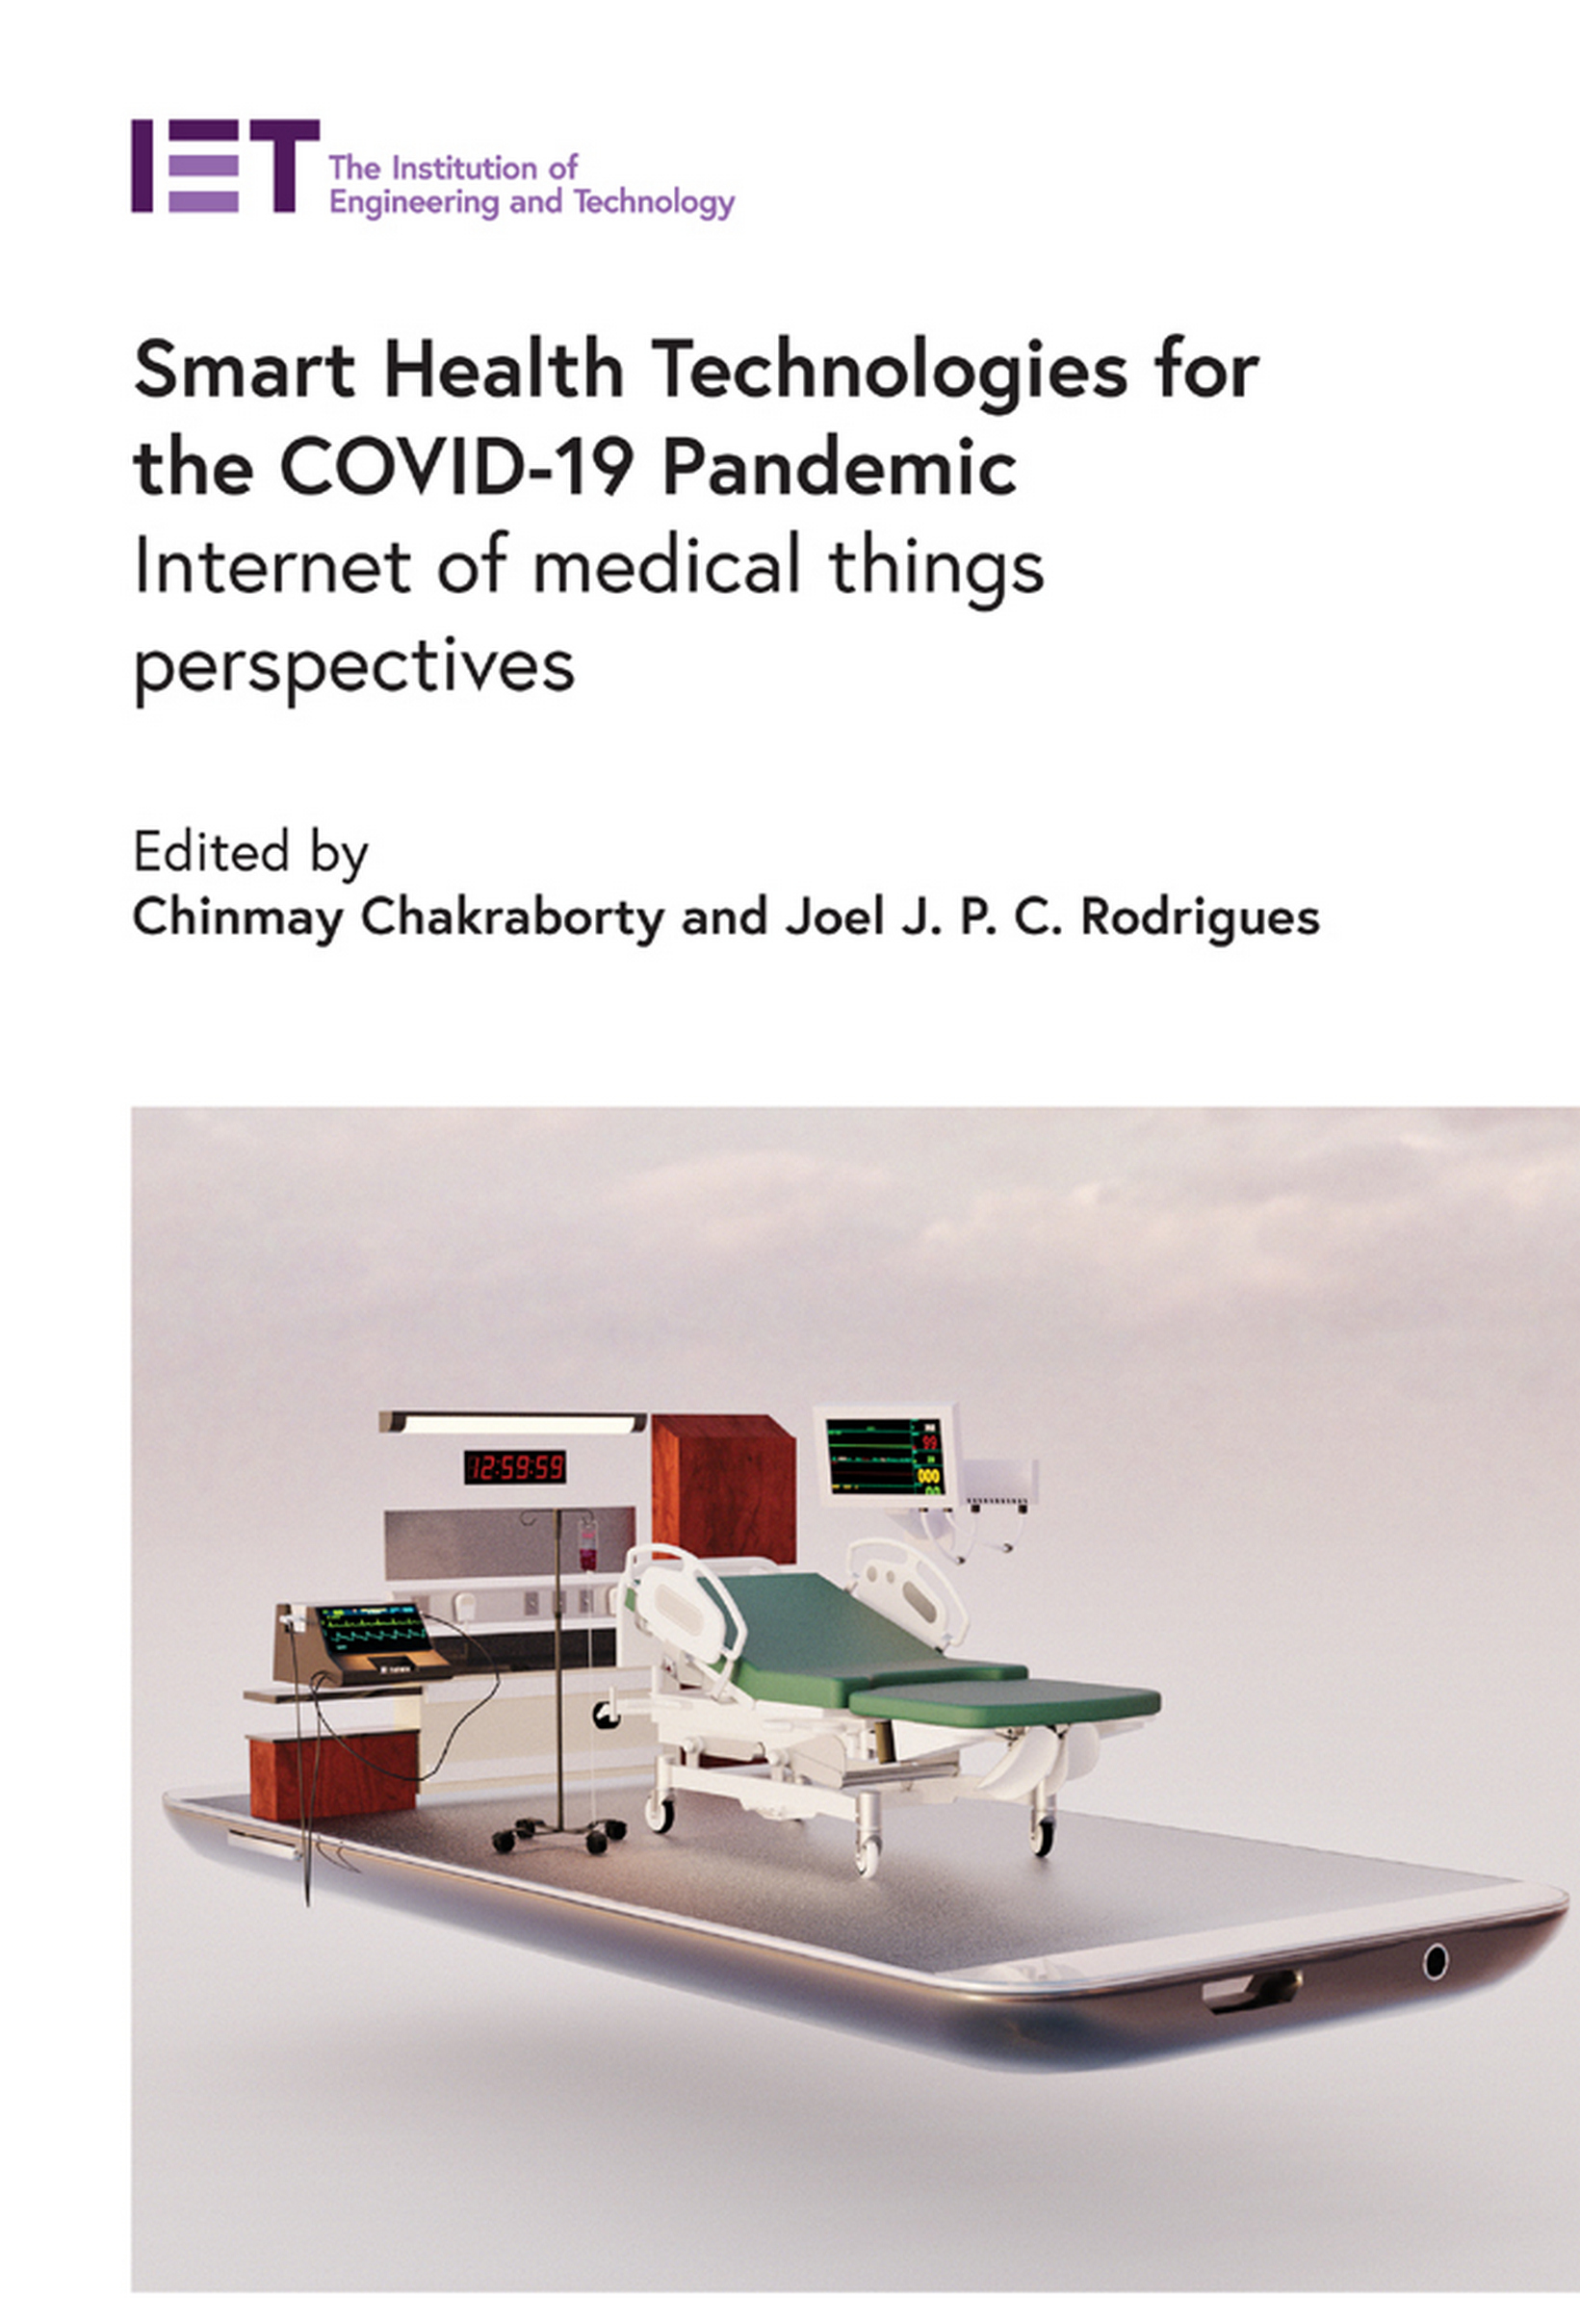 Smart Health Technologies for the COVID-19 Pandemic